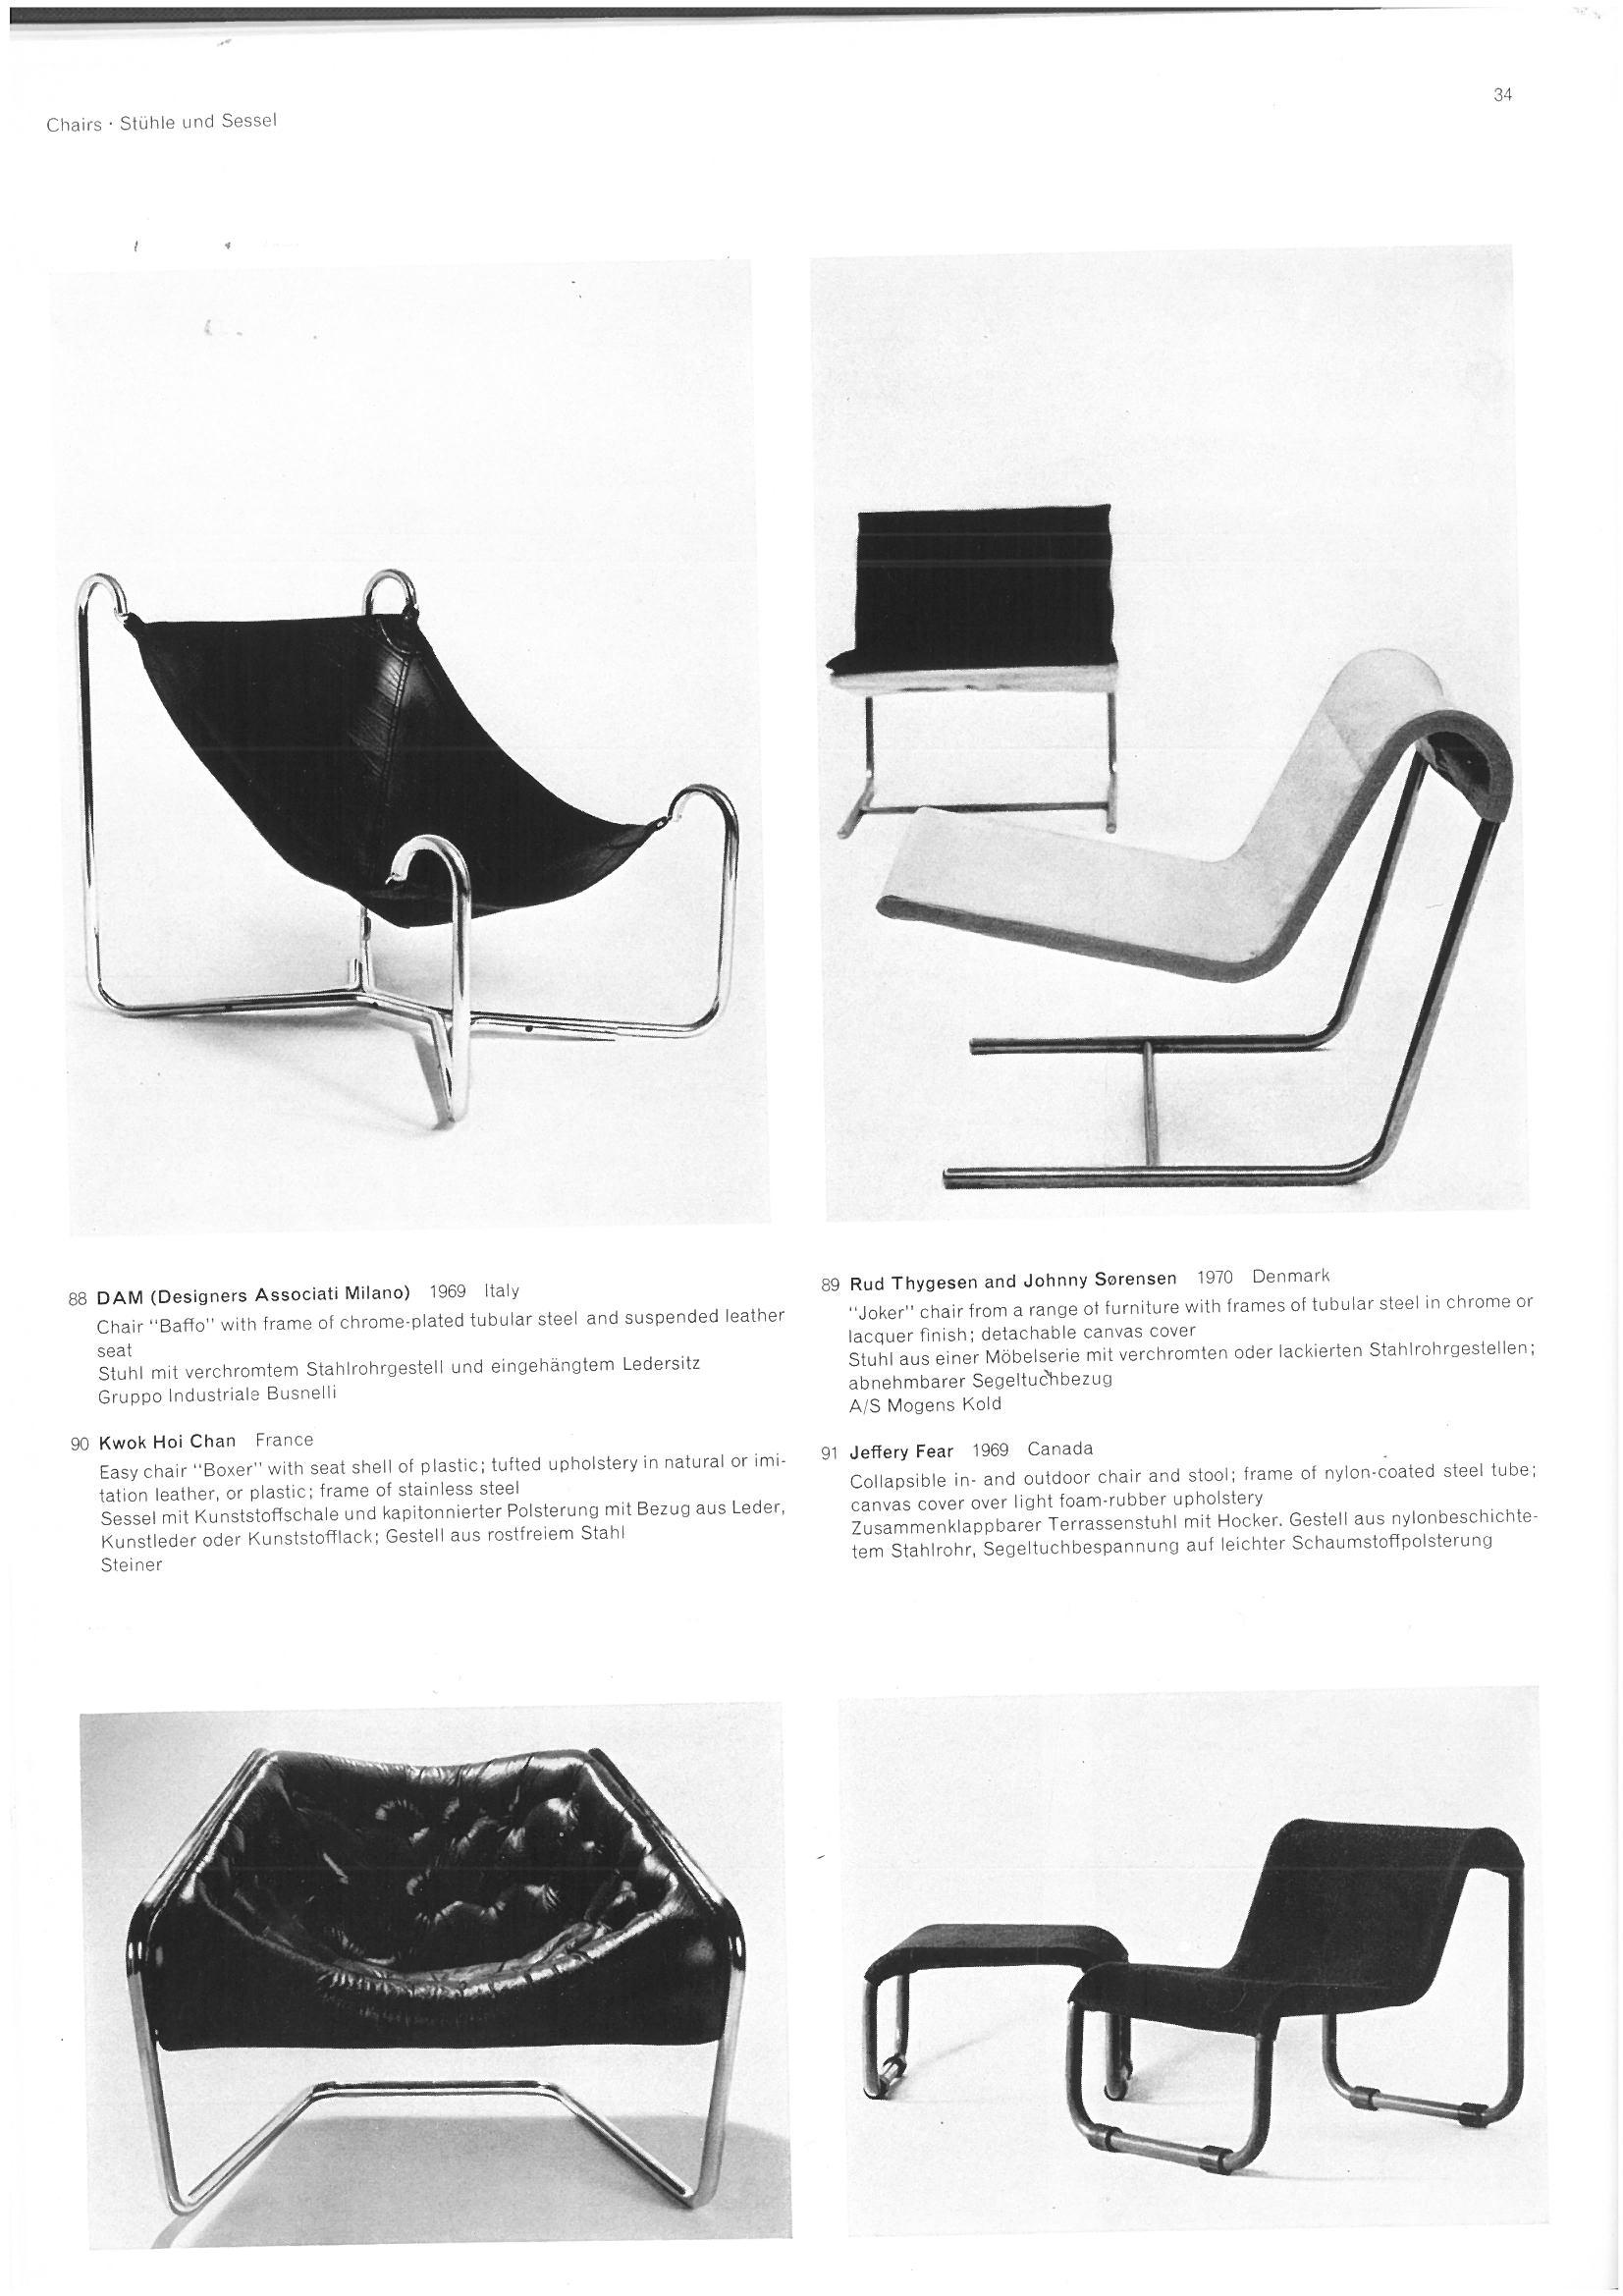 Baffo armchair by Gianni Pareschi and Ezio Didoni for Dam, by Busnelli 1969 For Sale 2